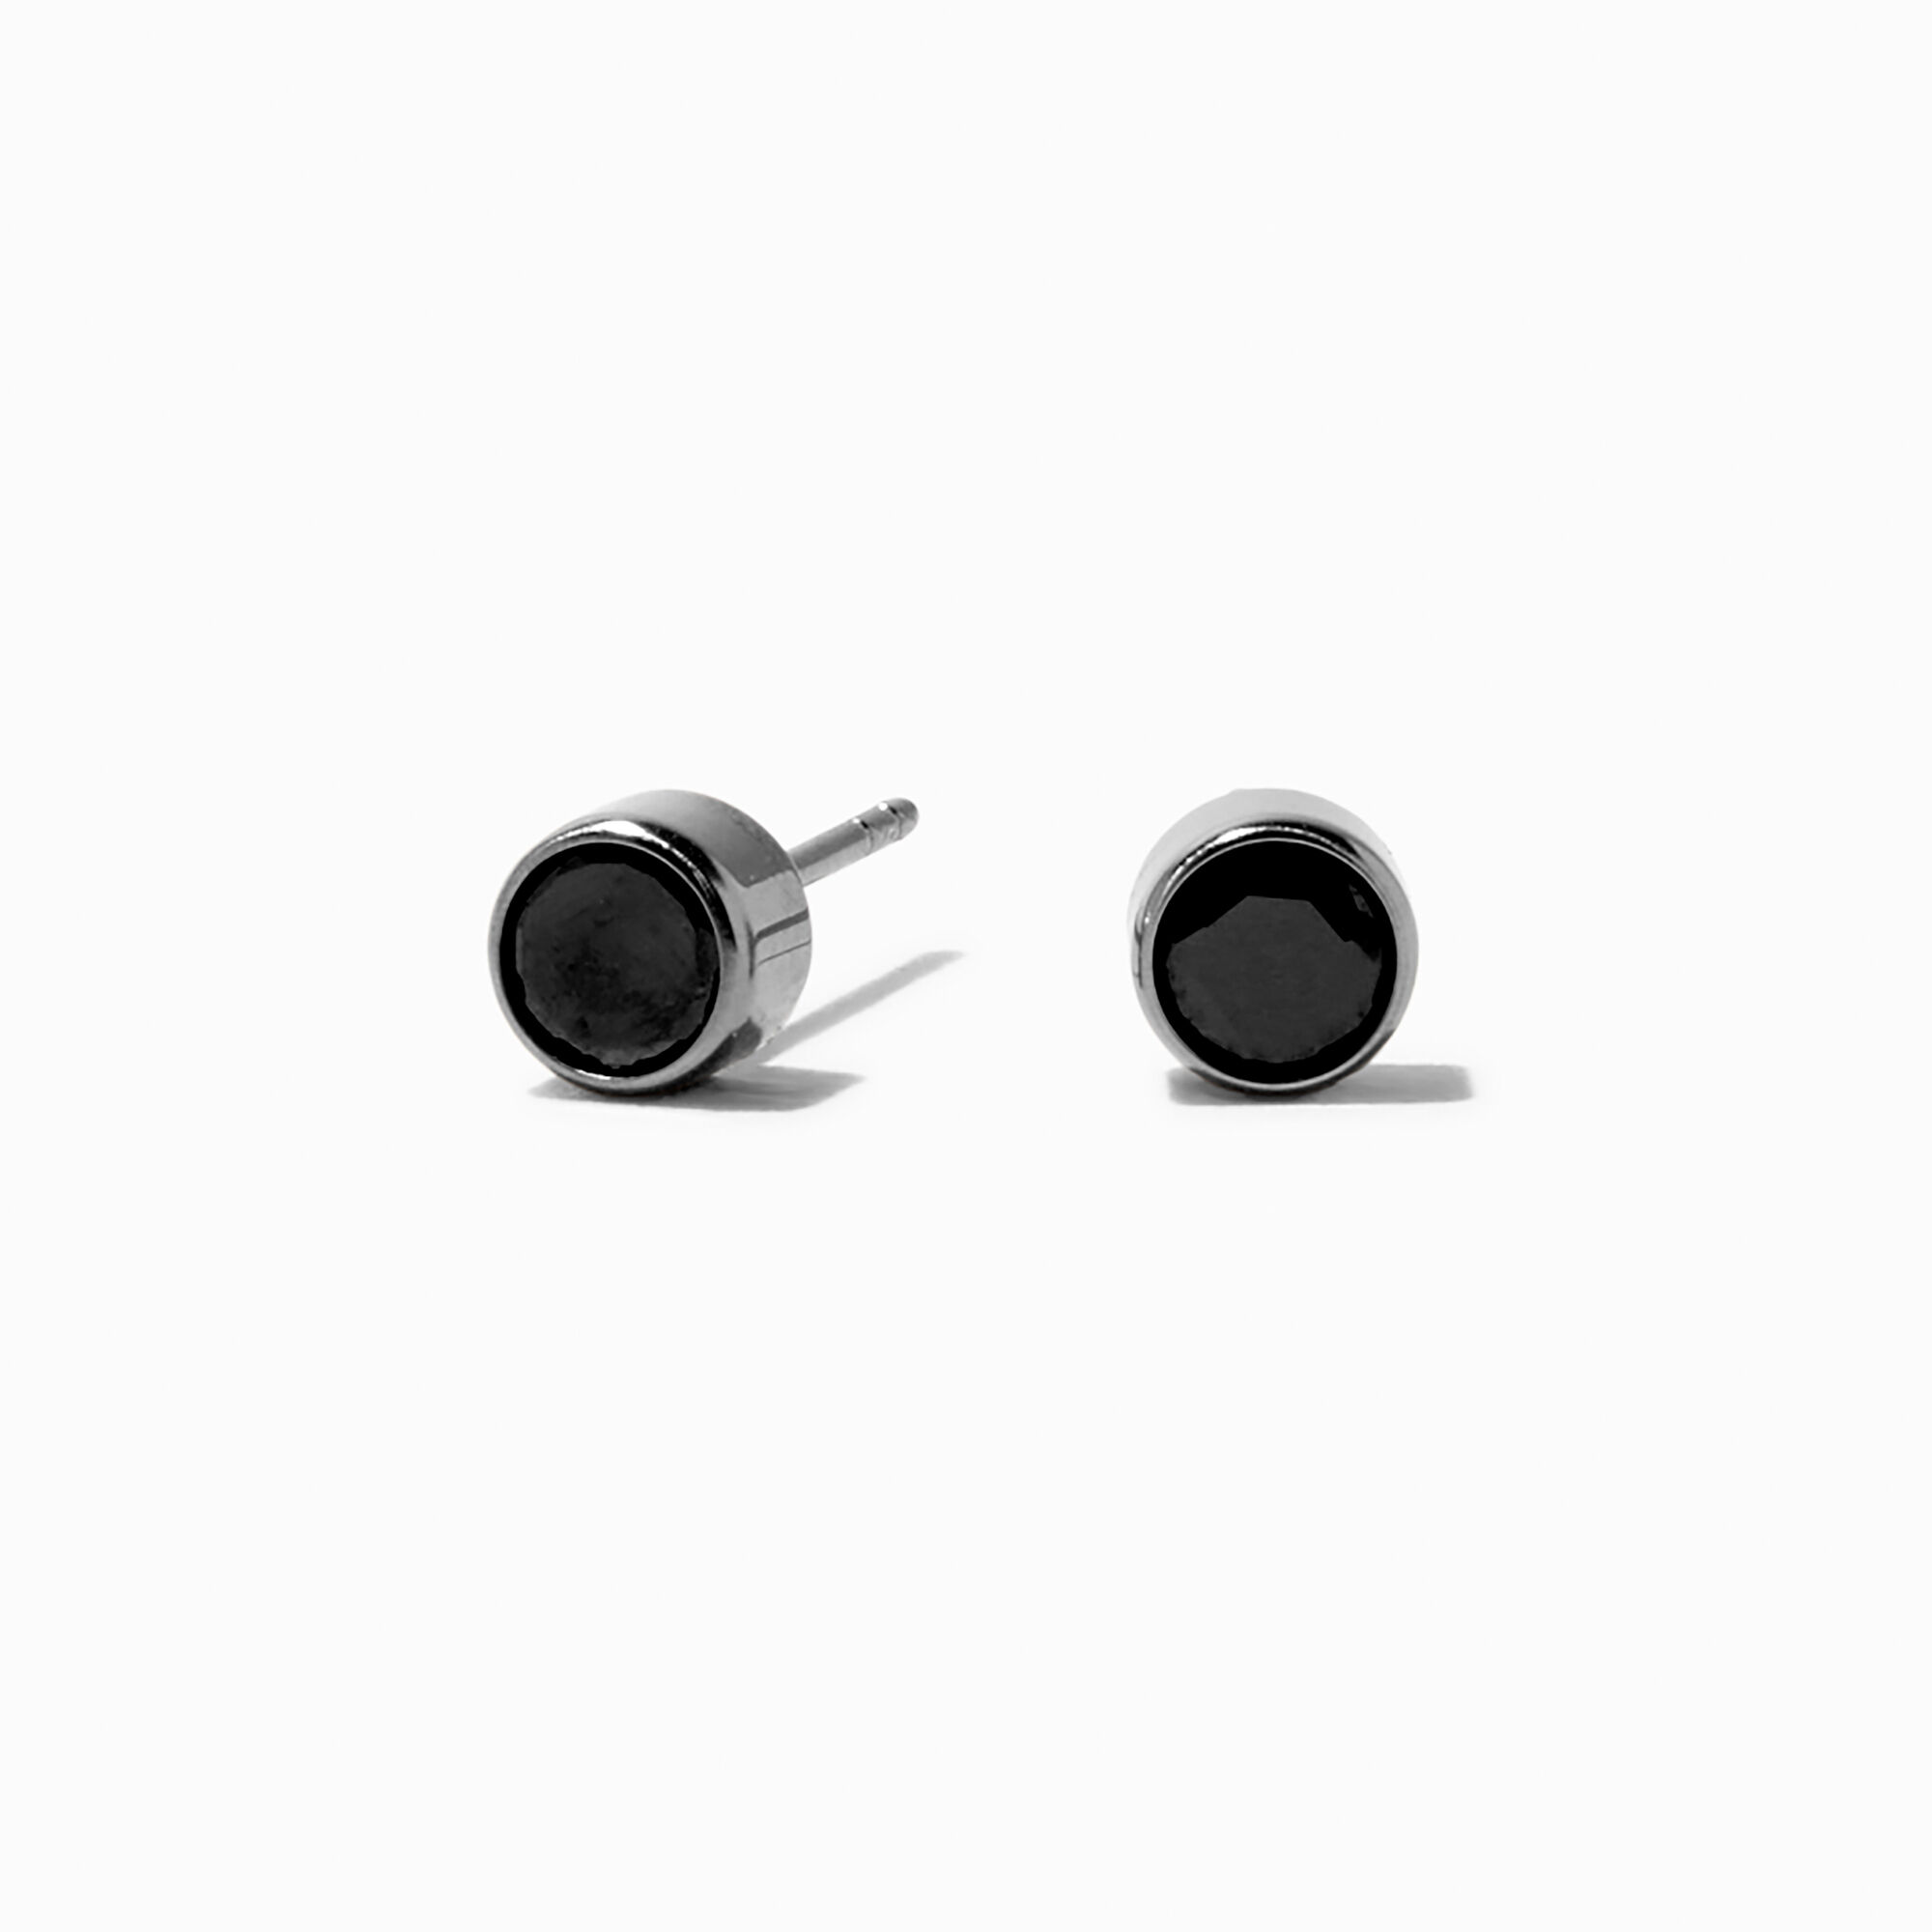 View Claires Titanium Bezeled 5MM Stud Earrings Black information